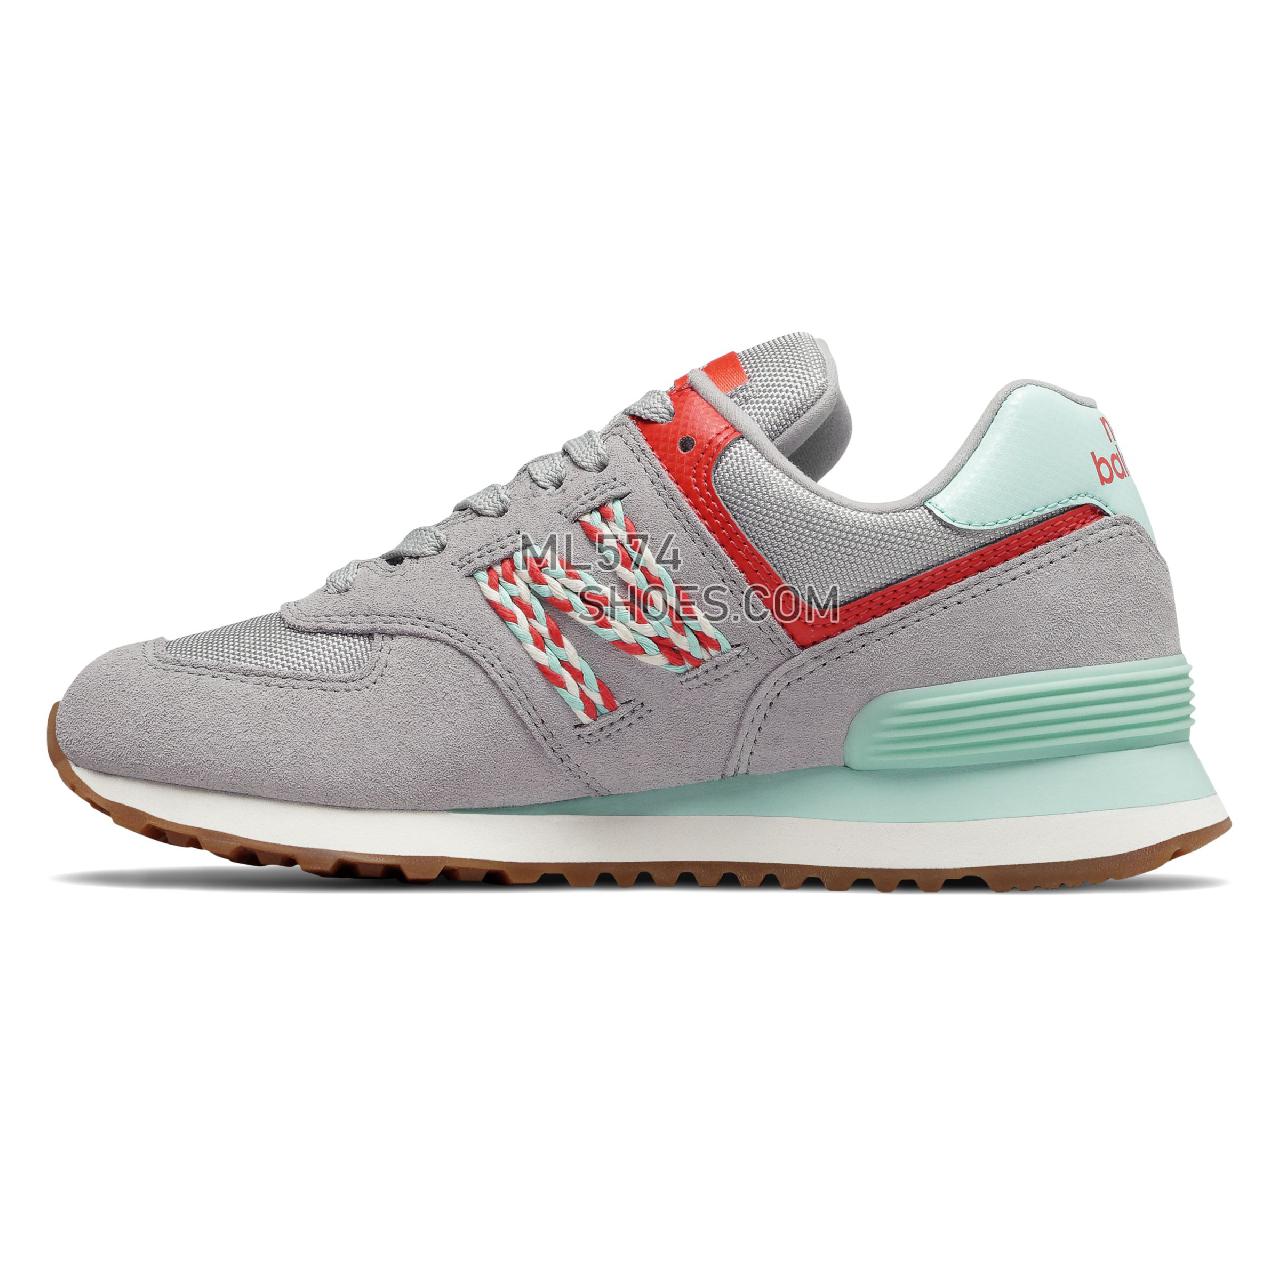 New Balance 574 - Women's Classic Sneakers - Rain Cloud with Light Reef and Coral Glow - WL574LDL